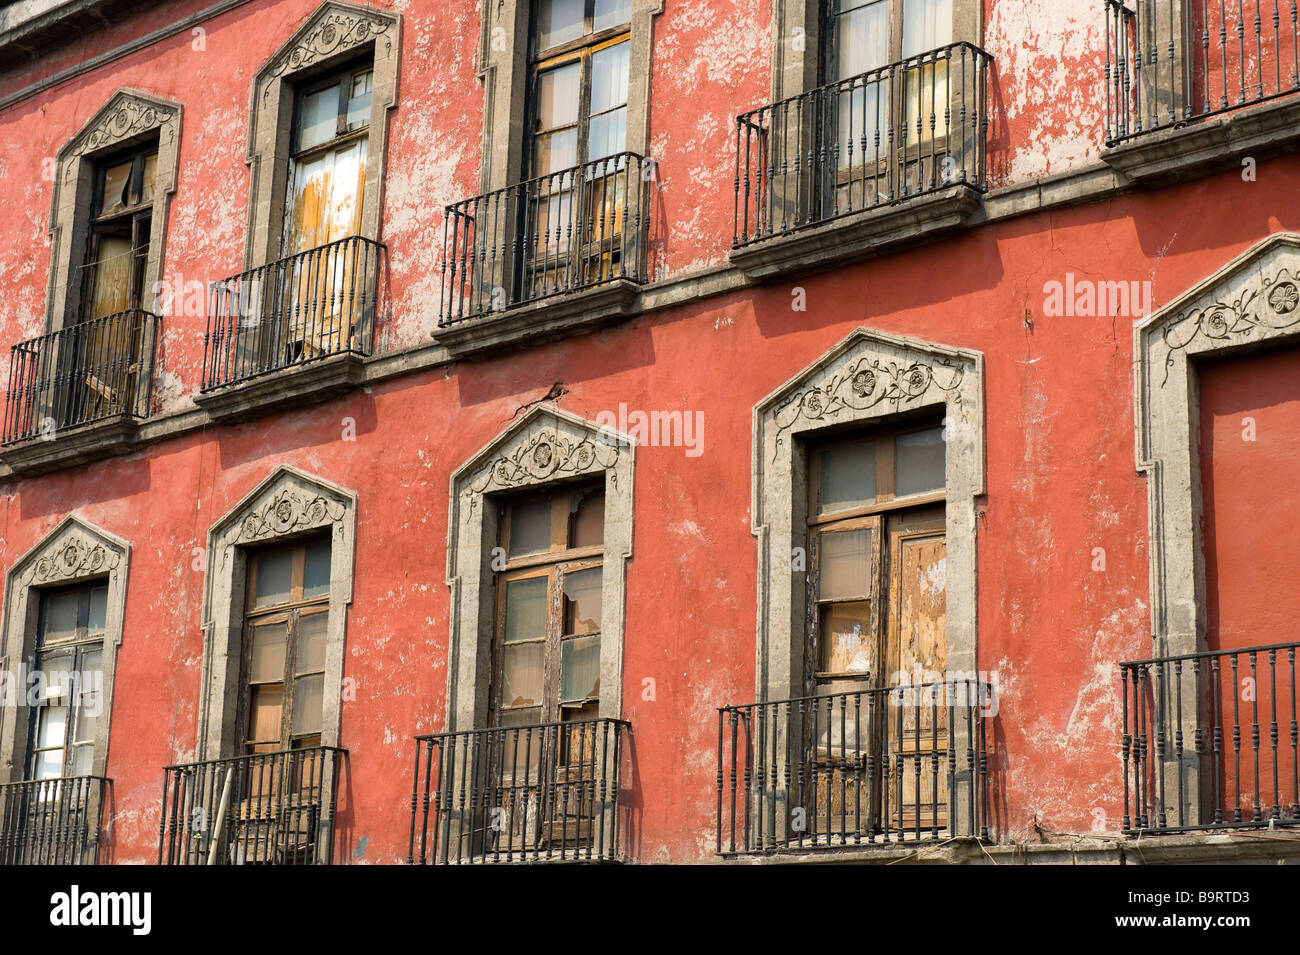 Arched windows on a red wall in the Centro Historico, Mexico City Stock Photo